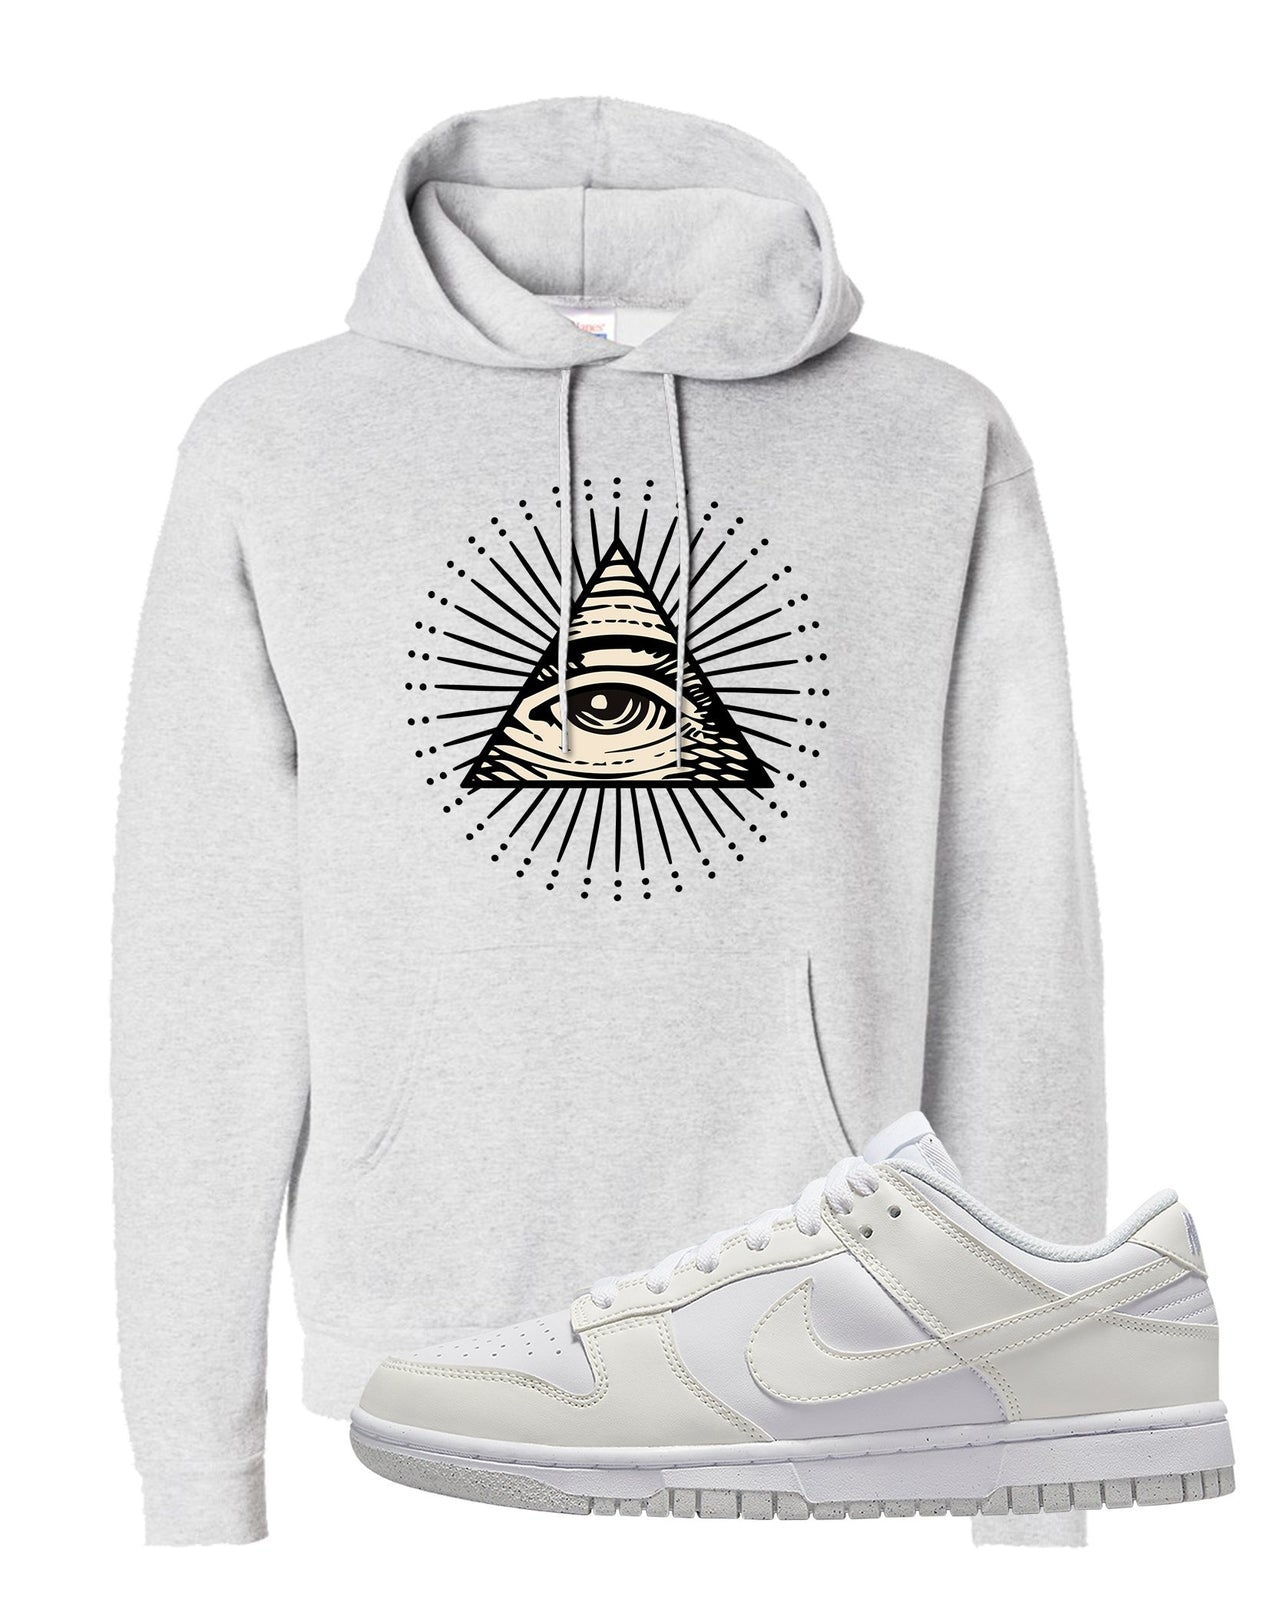 Next Nature White Low Dunks Hoodie | All Seeing Eye, Ash